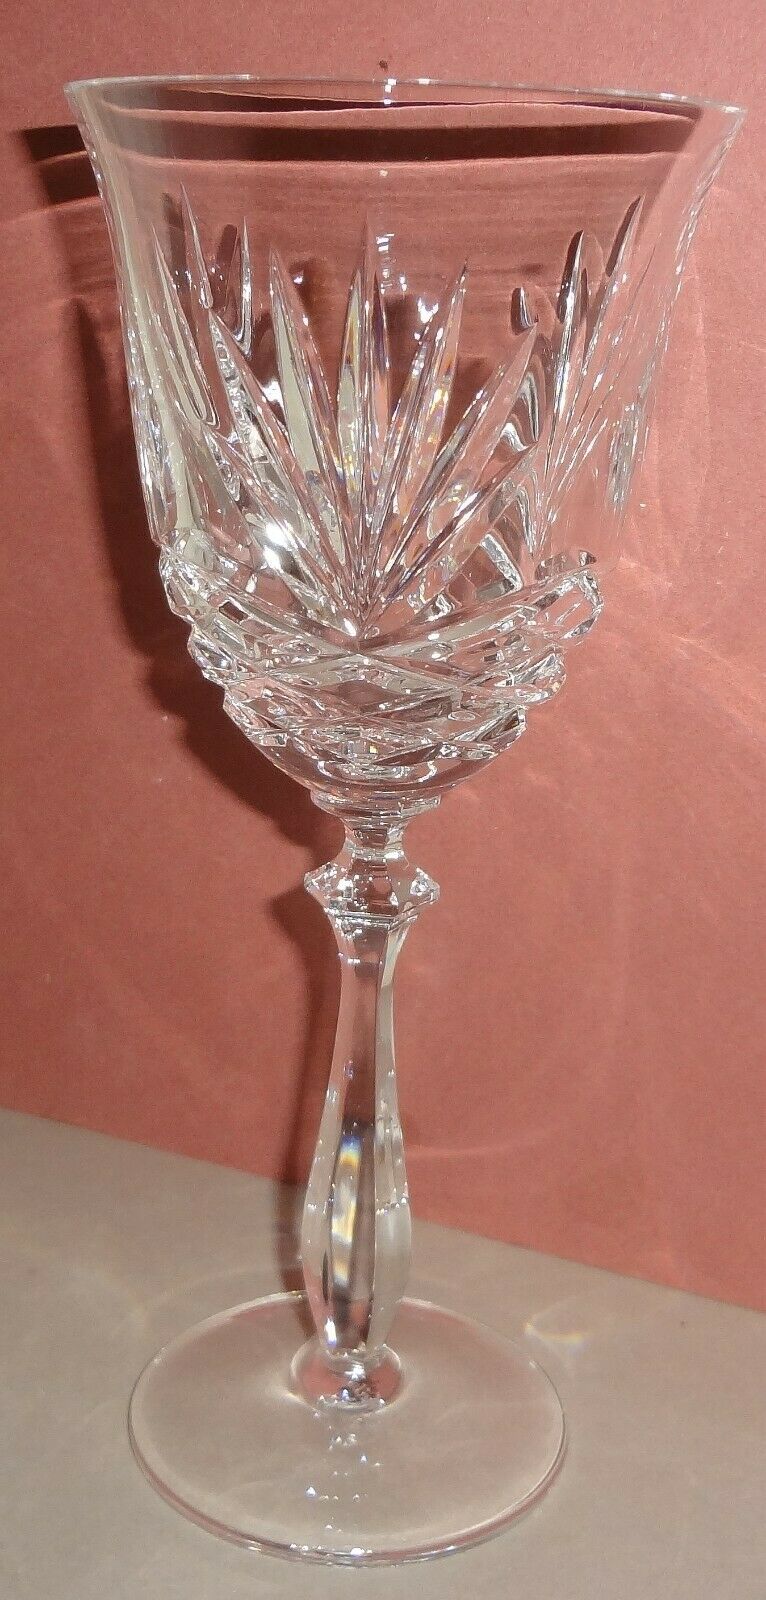 1985-2006 Noritake Cut Glass Hamton Hall Large Water Goblet (1 Of 8) Mint!